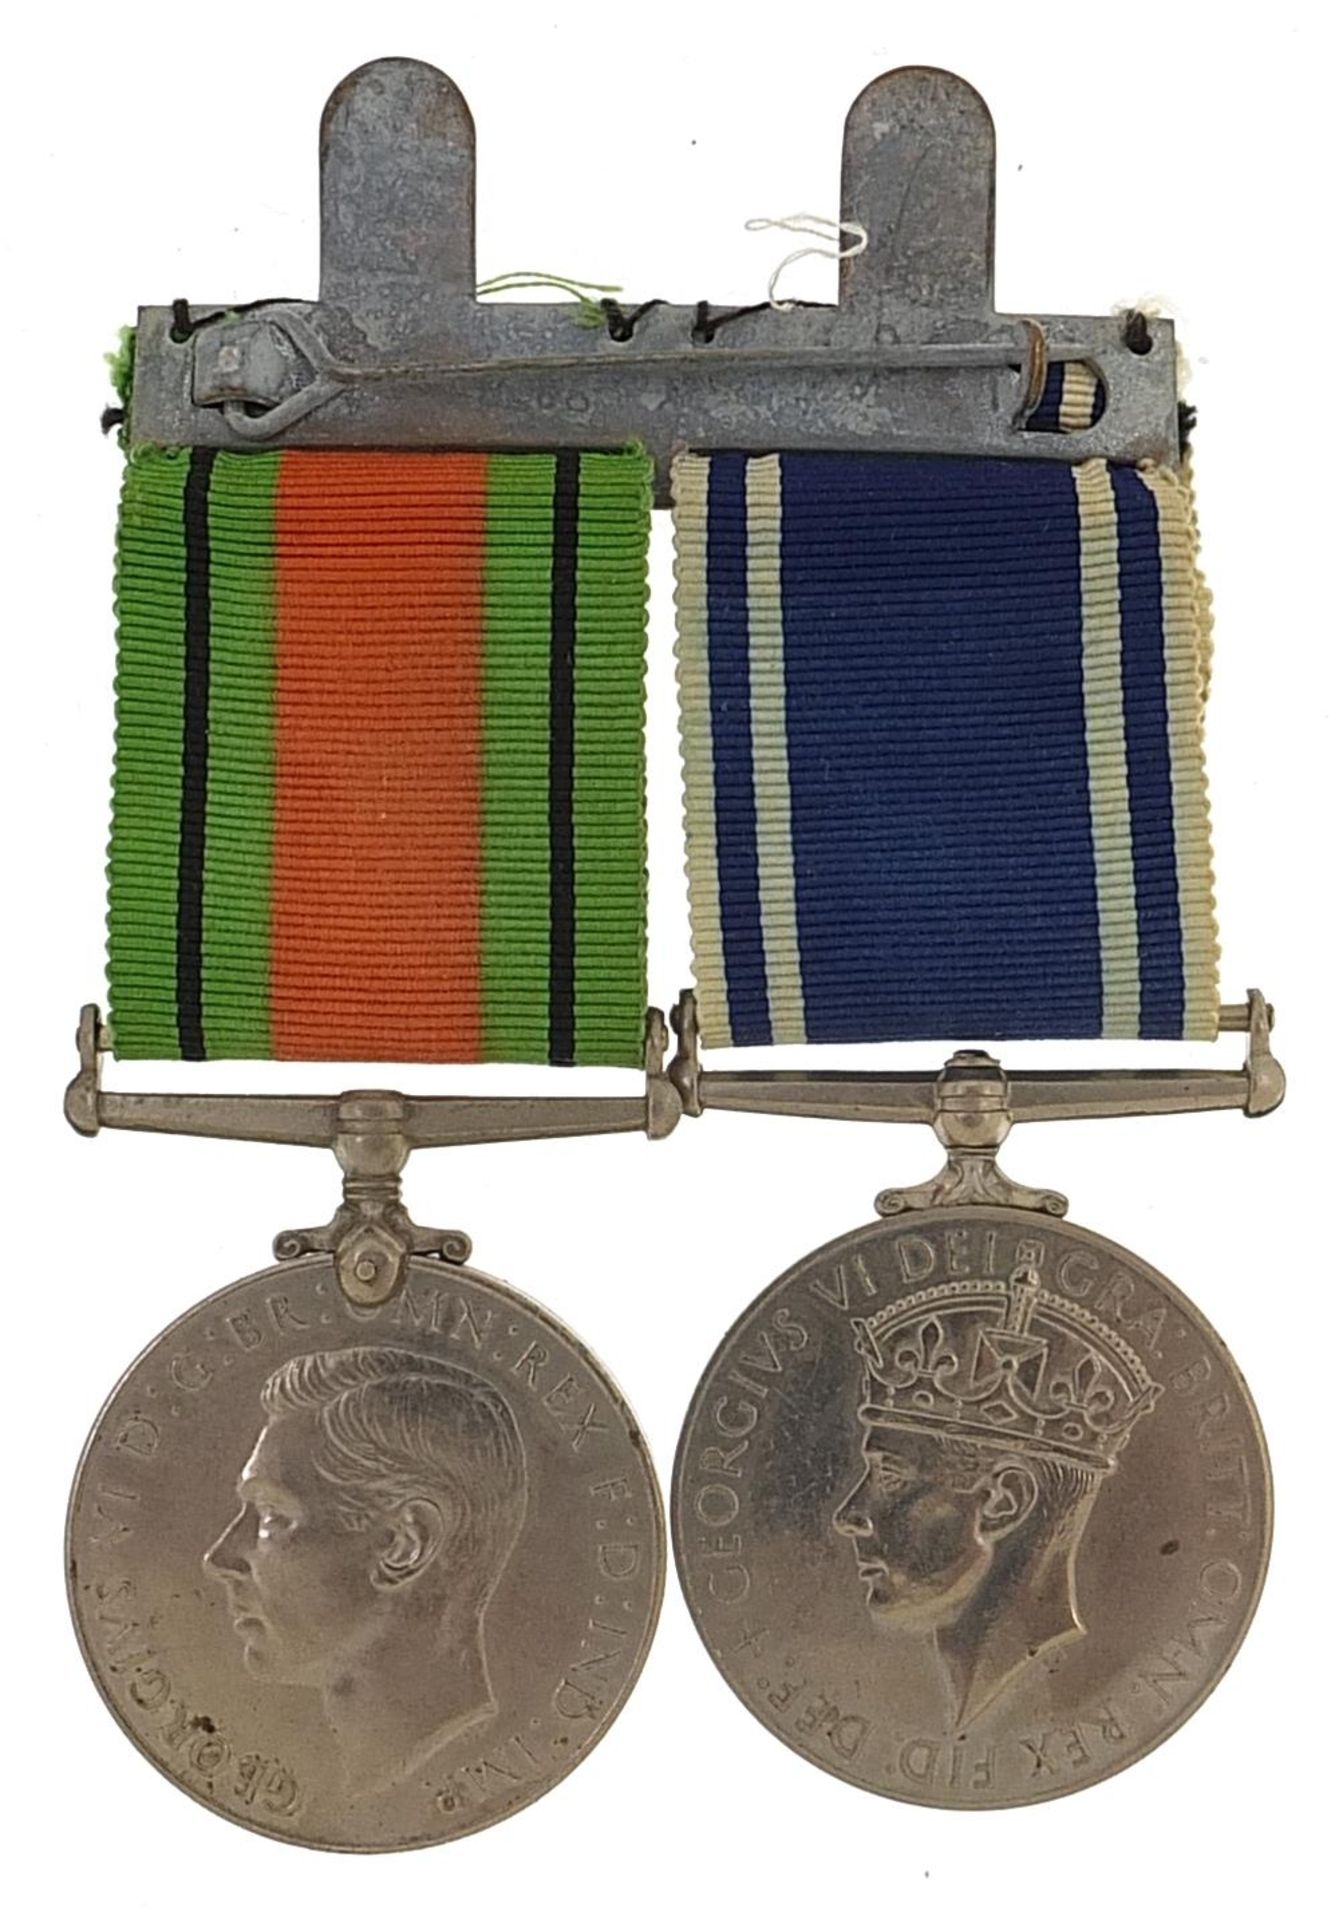 British military World War II Police two medal group including Exemplary Police Service medal - Image 3 of 4